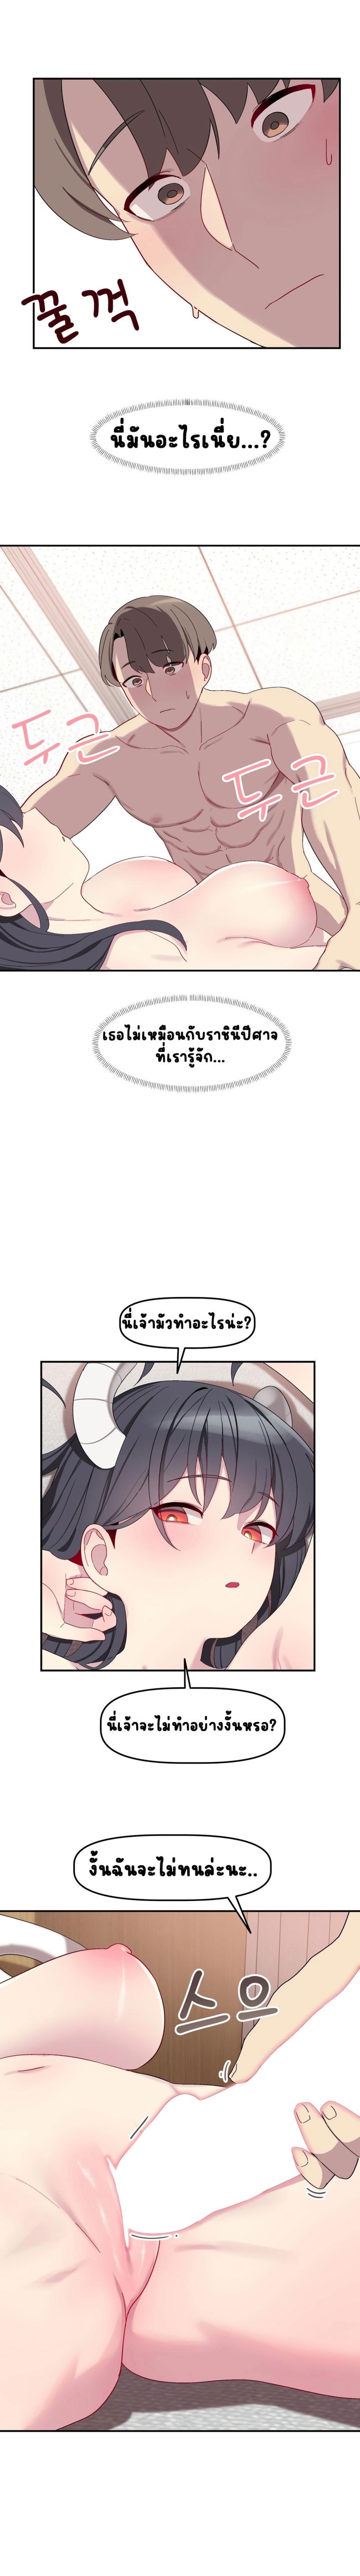 Hospitalized Life in Another World 5-0 ภาพที่ 6